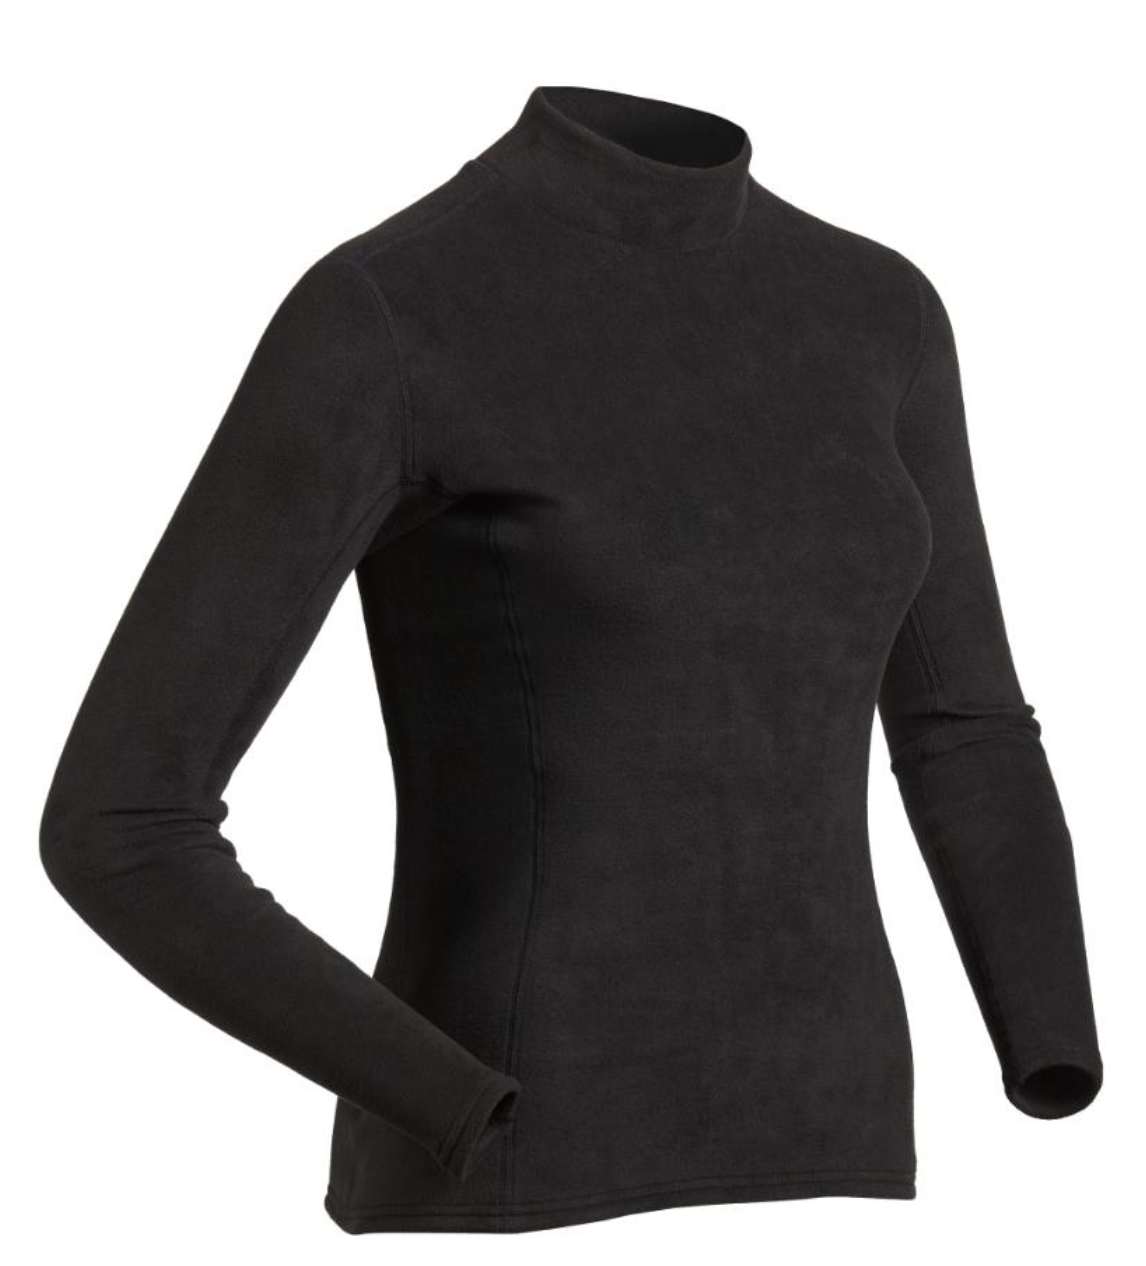 Immersion Research Women's Long Sleeve Thick Skin